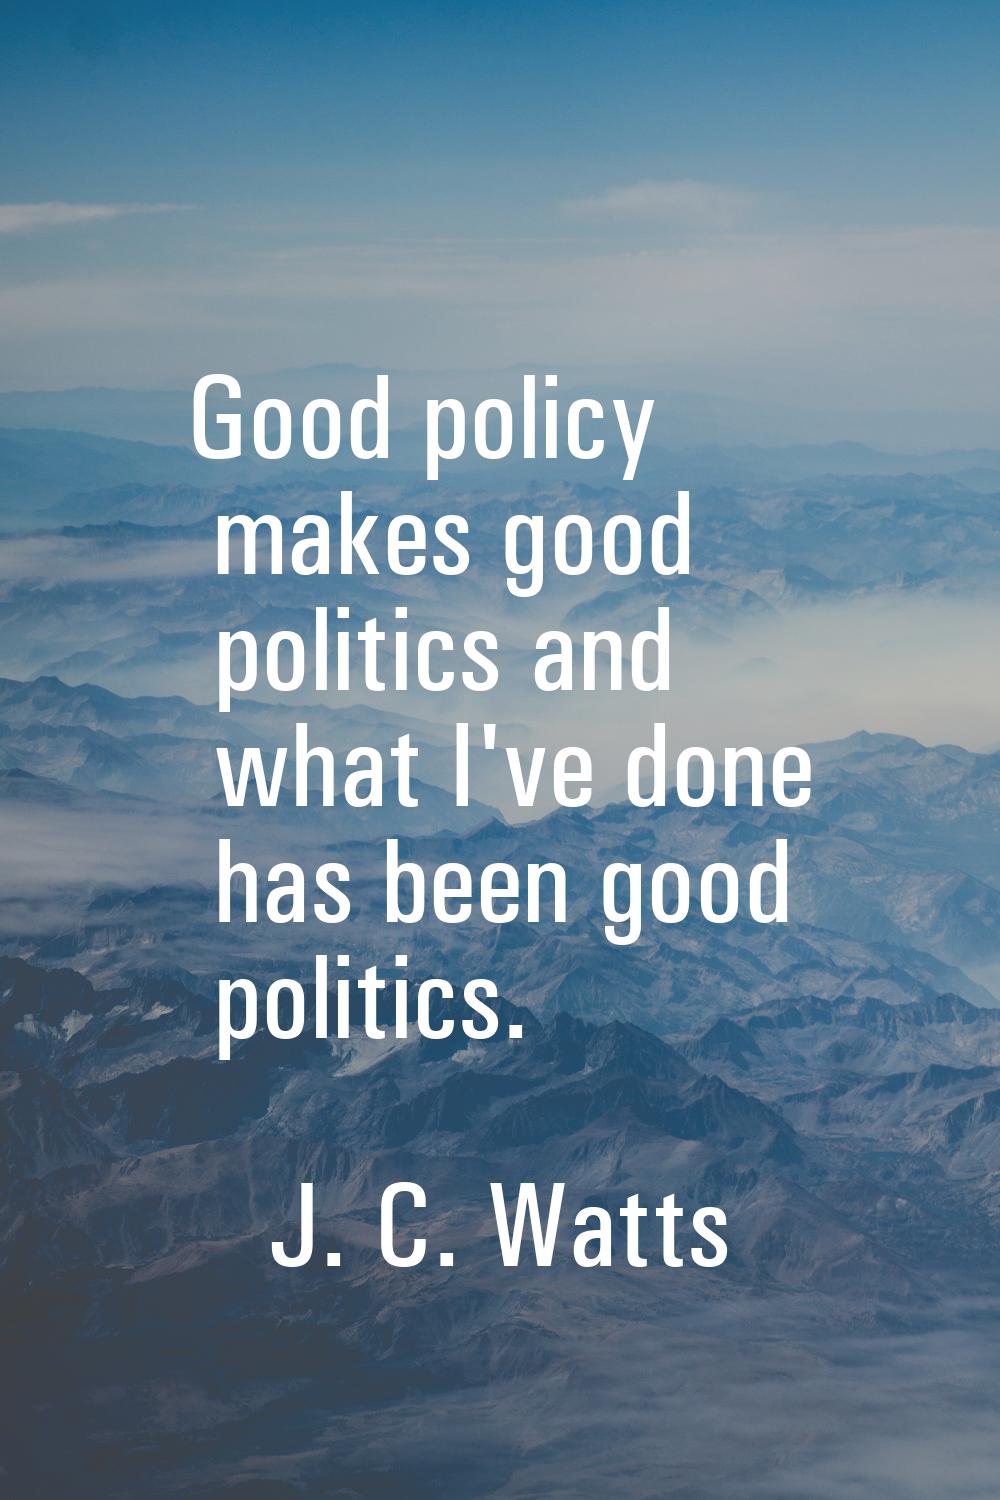 Good policy makes good politics and what I've done has been good politics.